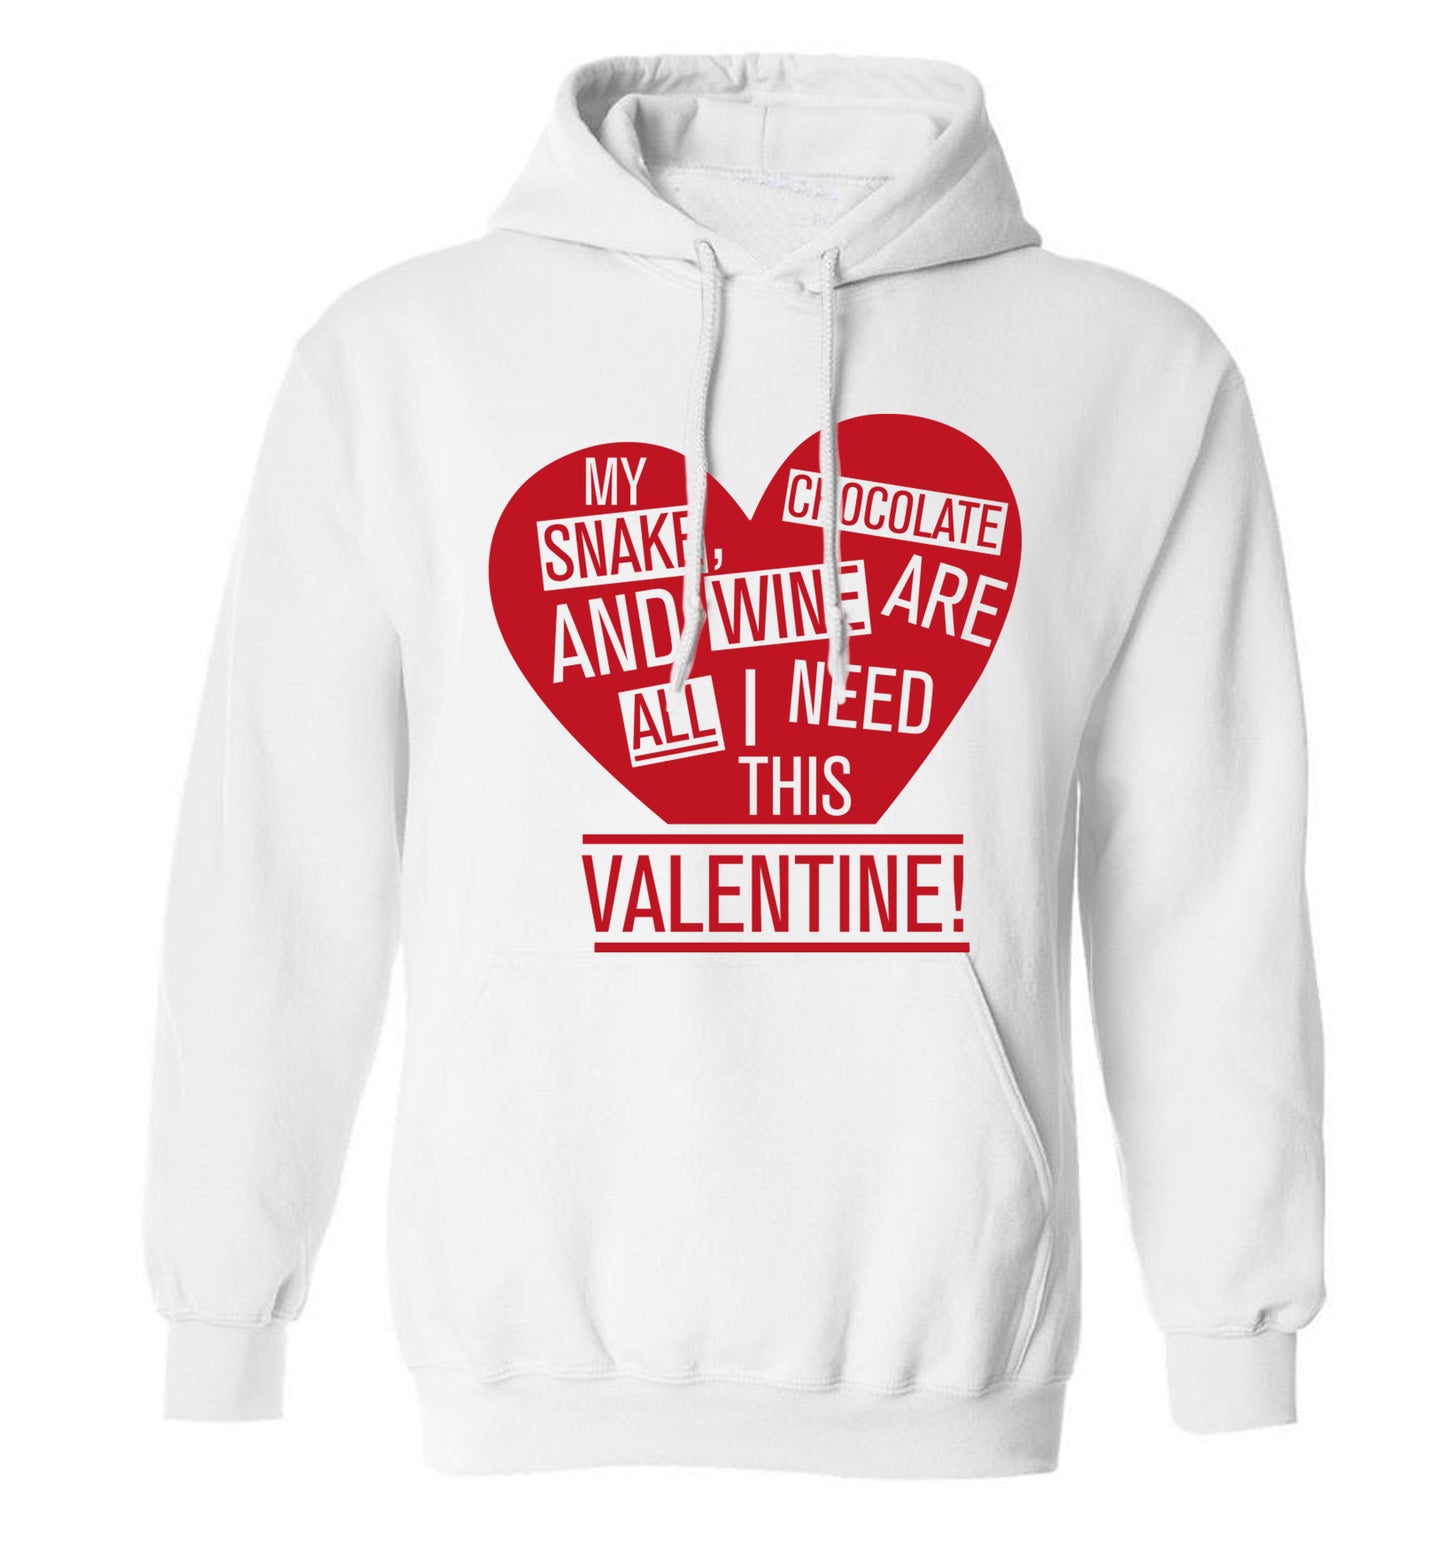 My snake, chocolate and wine are all I need this valentine! adults unisex white hoodie 2XL